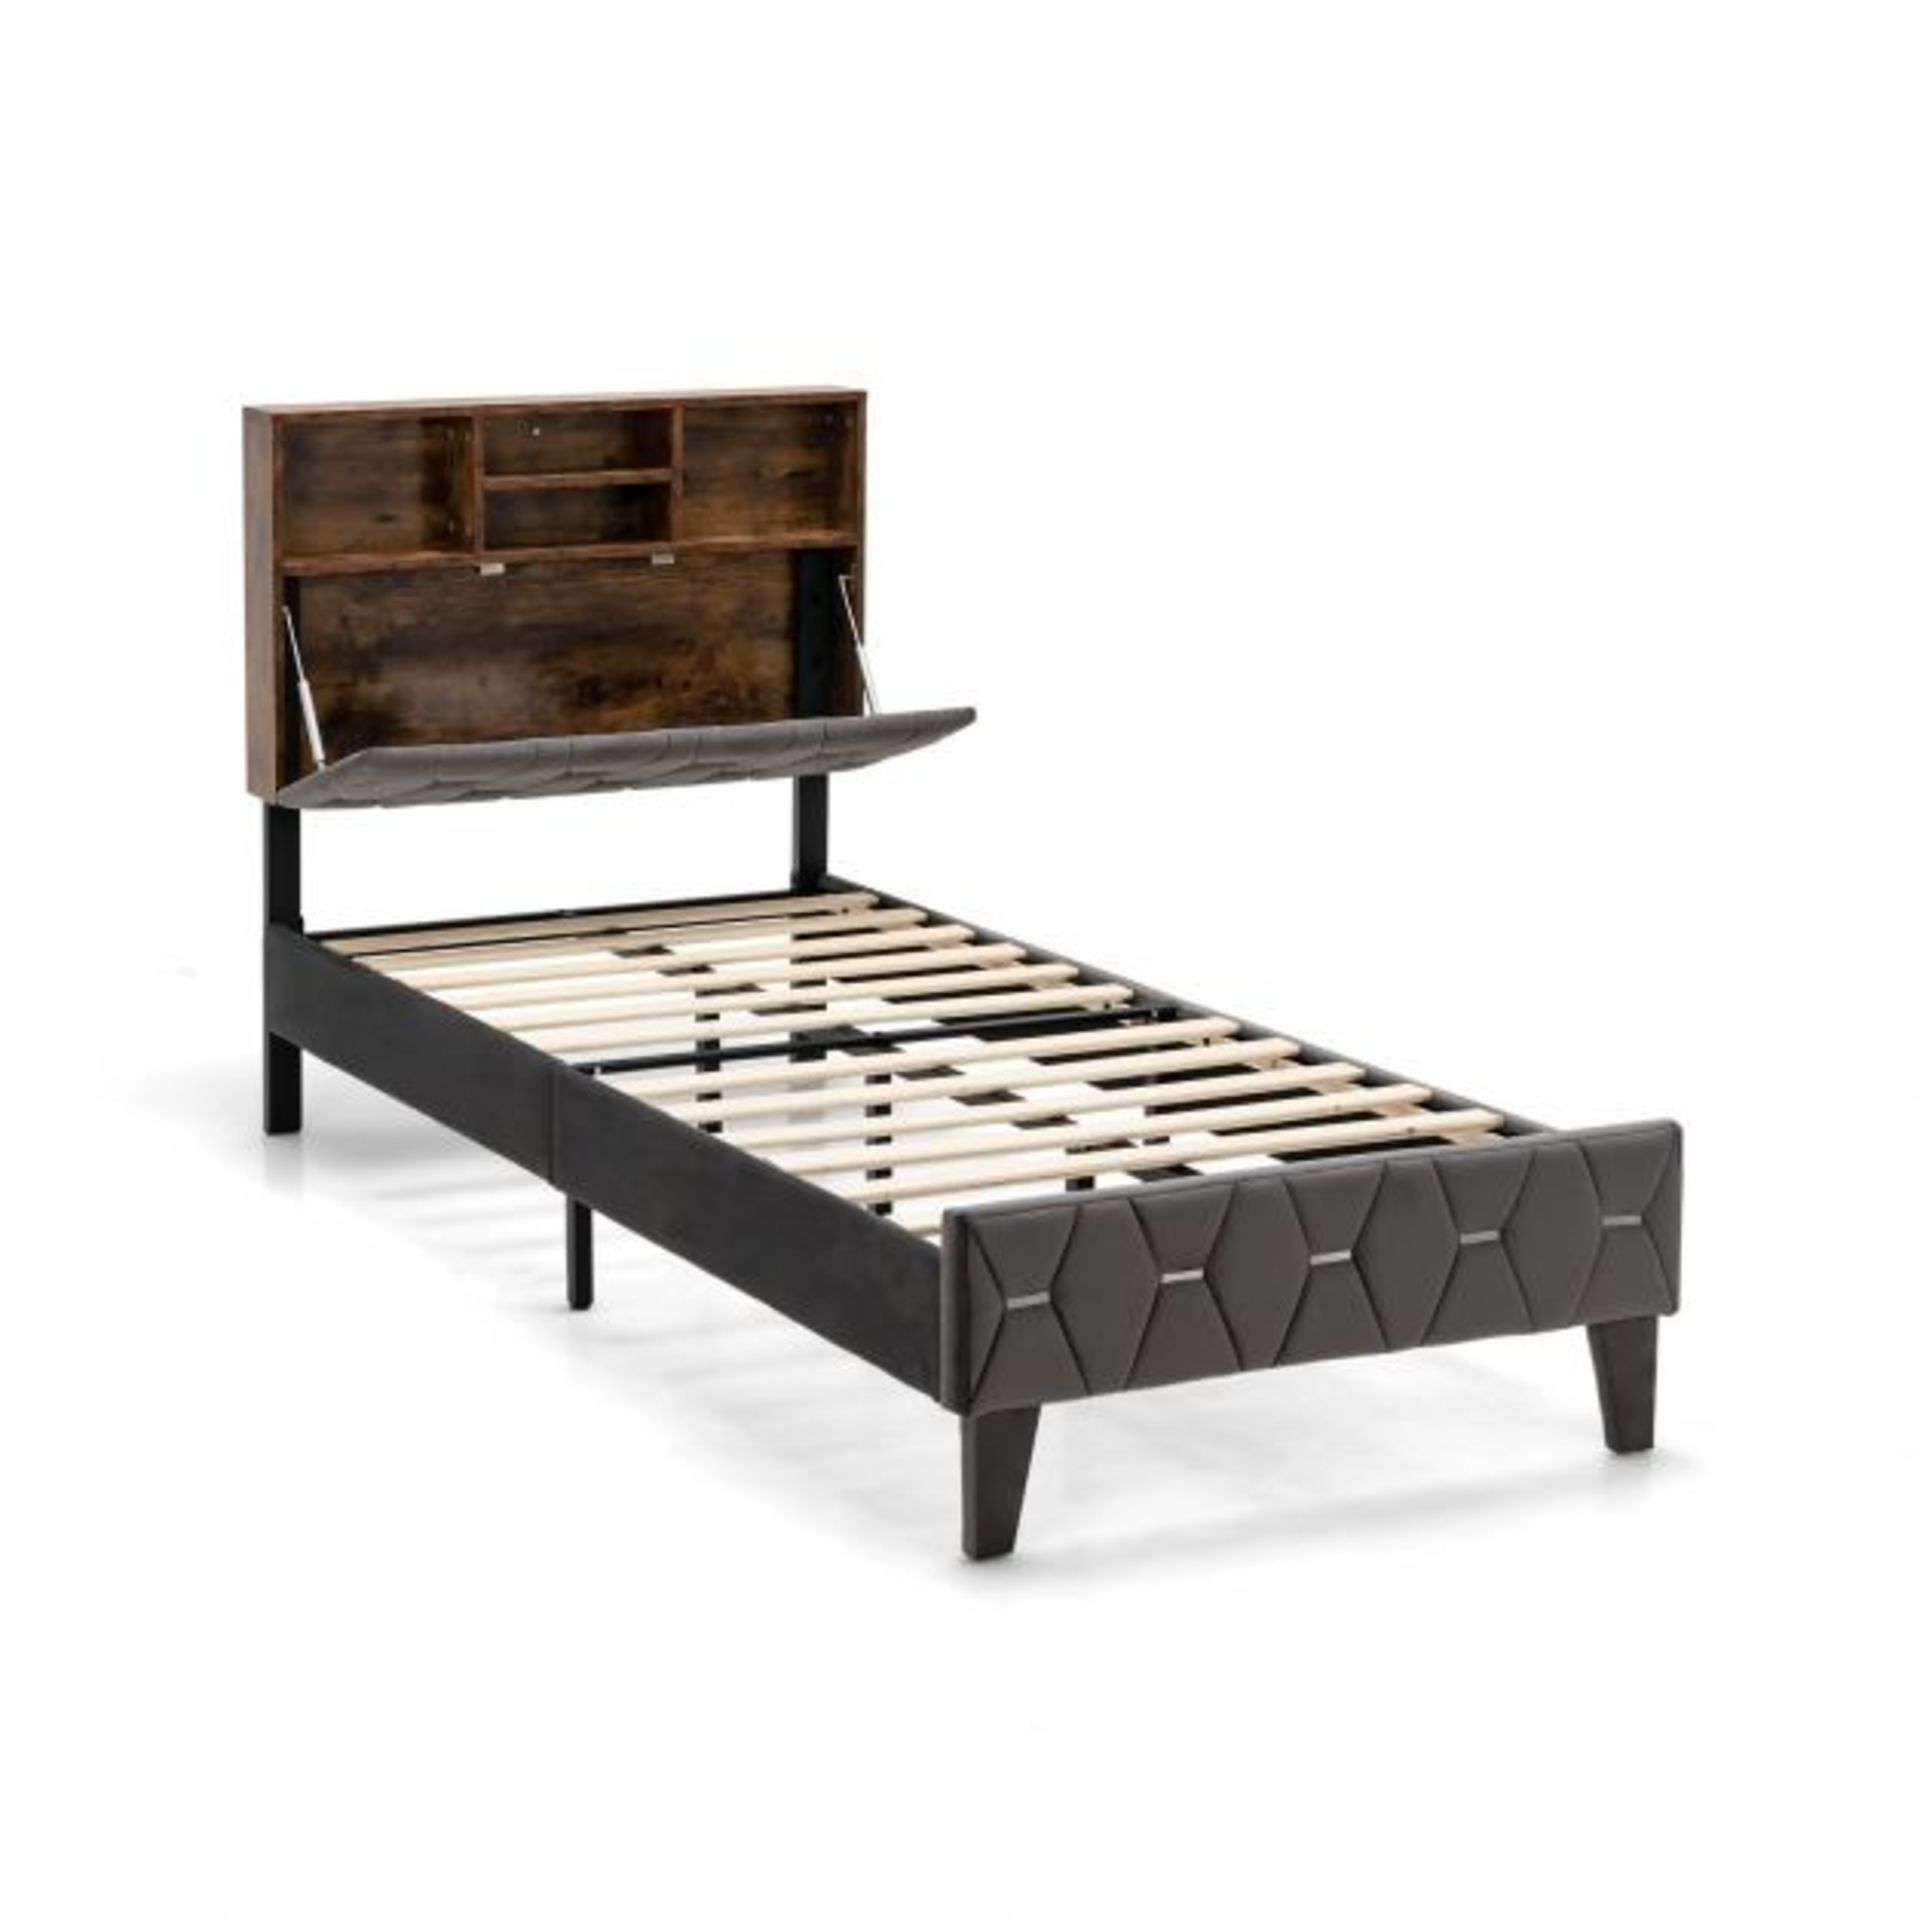 Single Frame with Storage Headboard and Slat Support - ER54